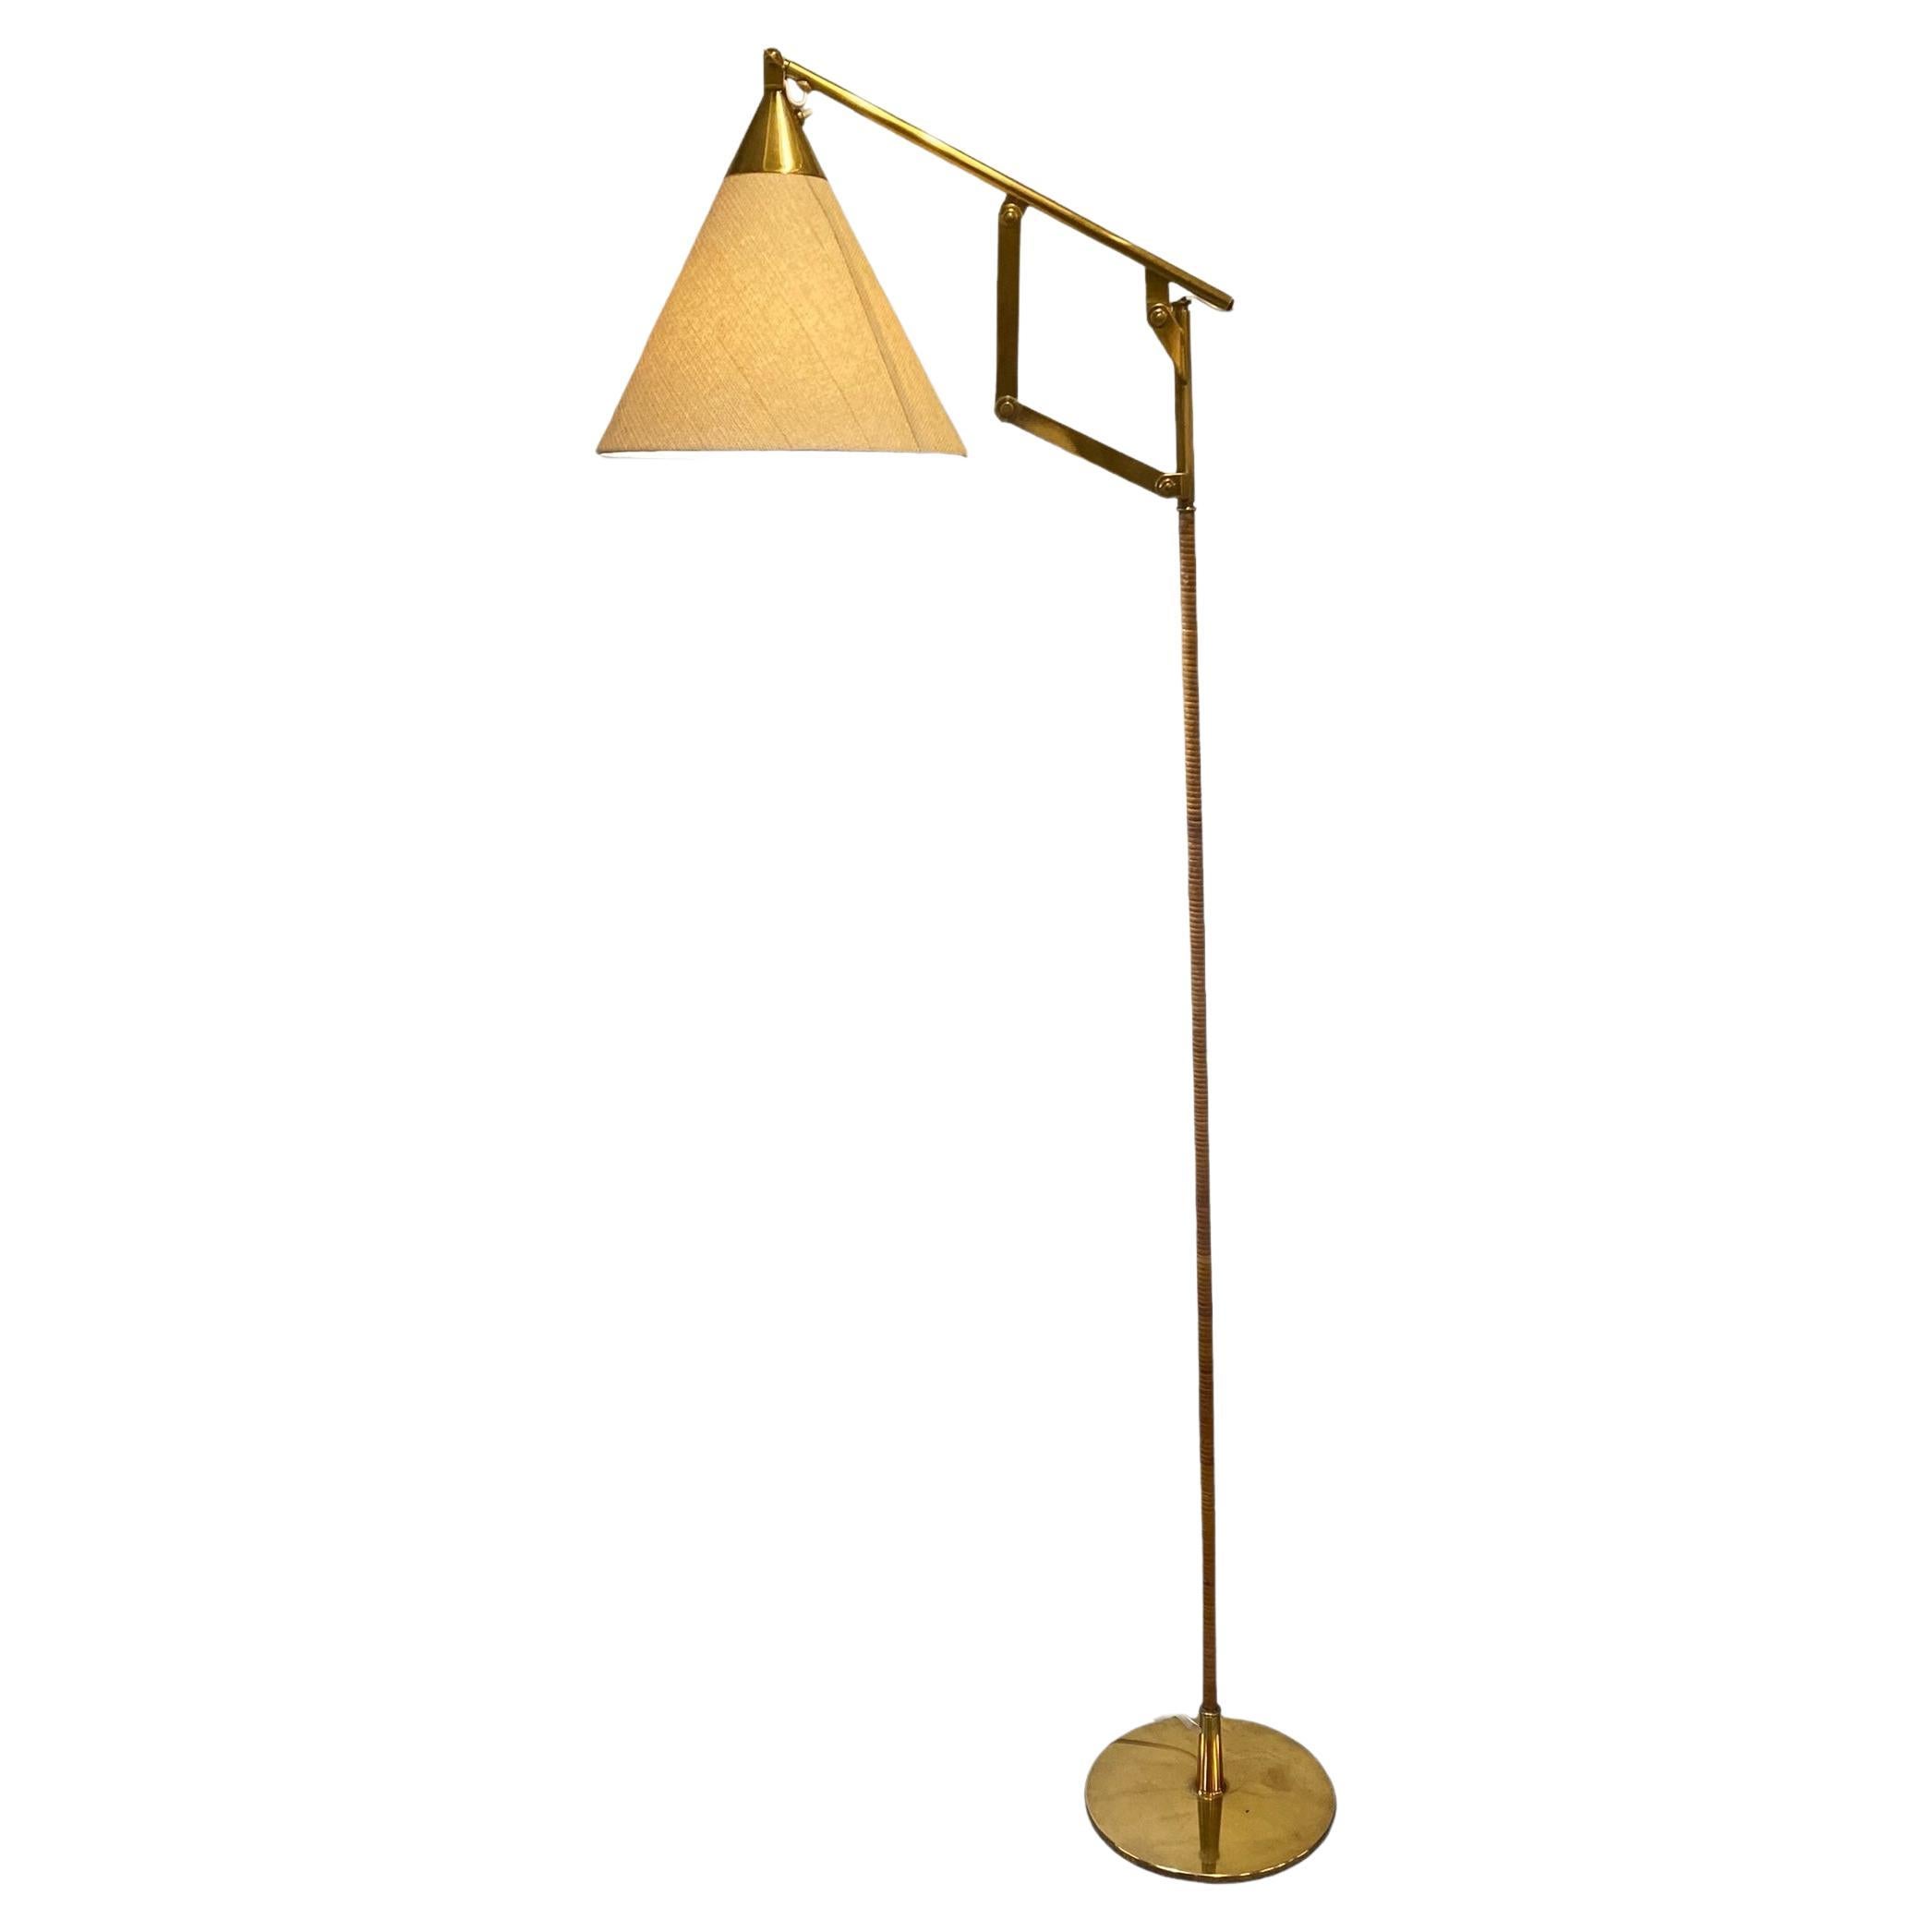 Scandinavian Modern A Beautiful Paavo Tynell Floor Lamp Model 9605 for Taito Oy, 1950s  For Sale